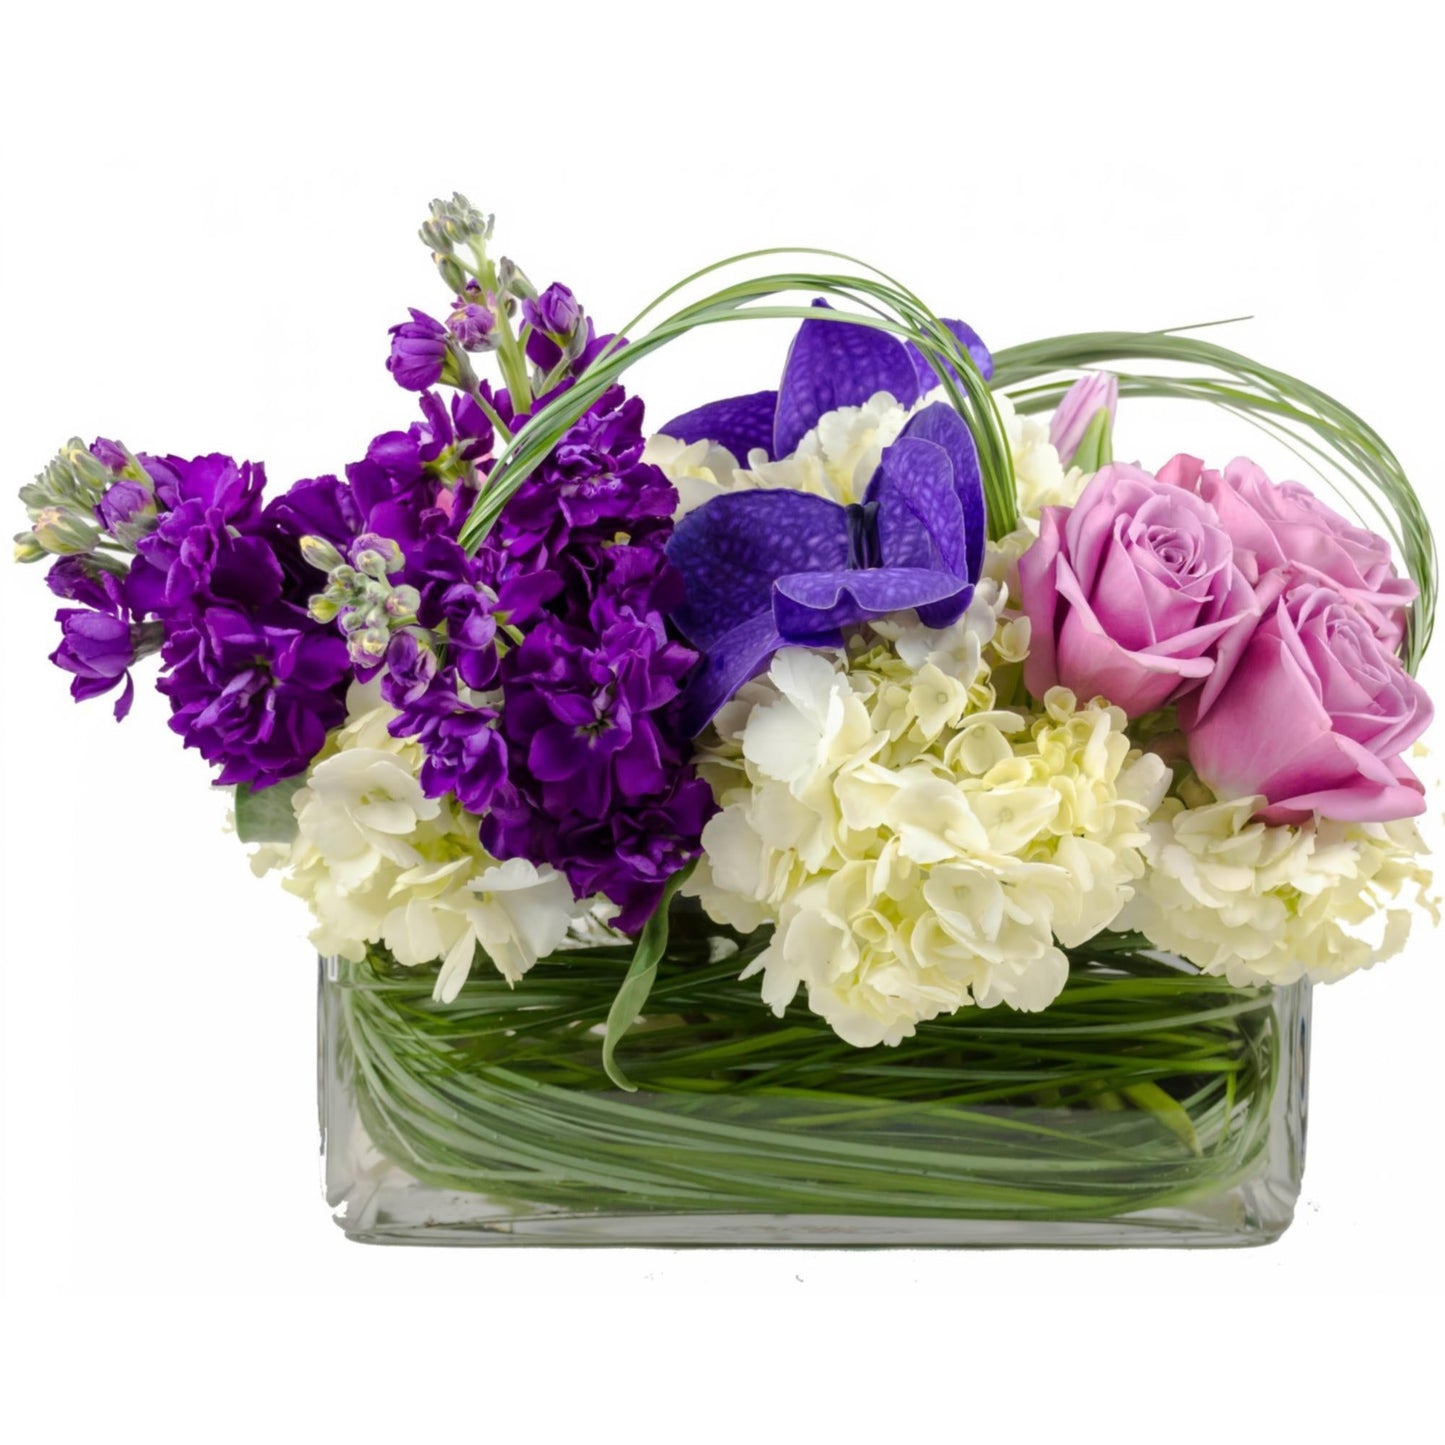 Fabulous Days to Come - Floral_Arrangement - Flower Delivery NYC